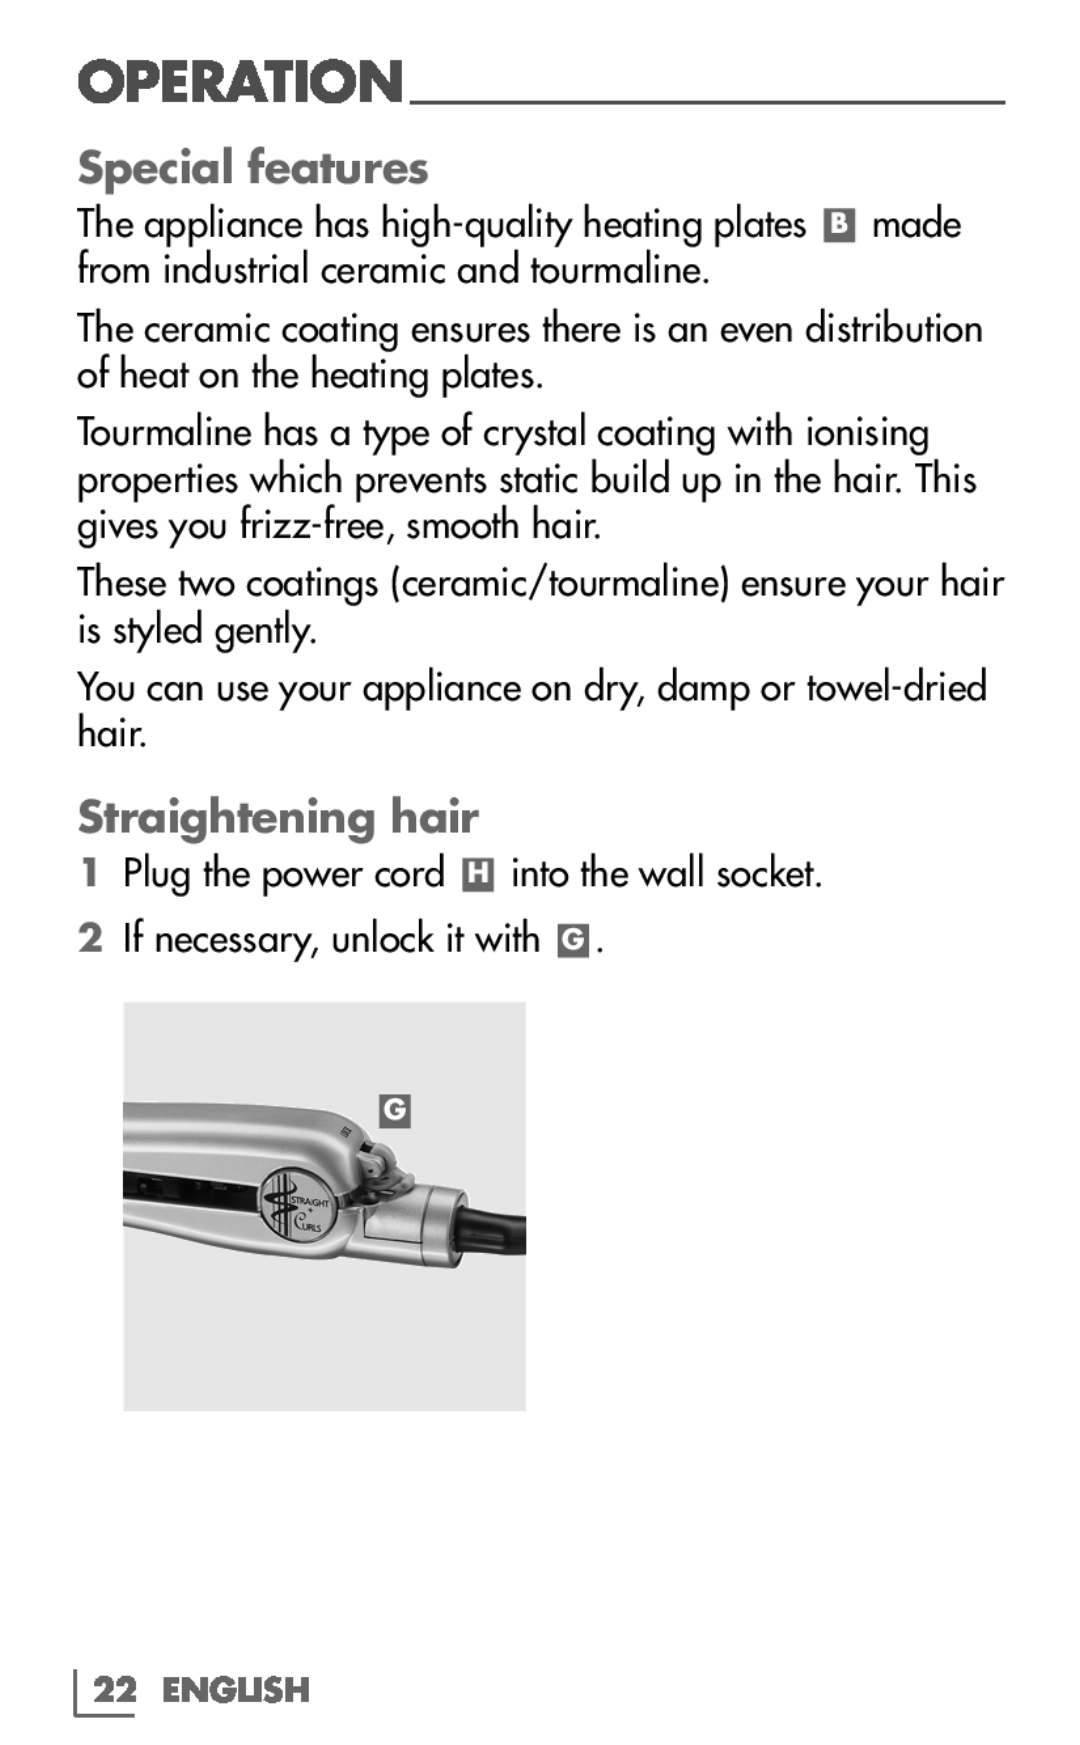 Grundig HS 7630 manual Special features, Straightening hair, Operation 